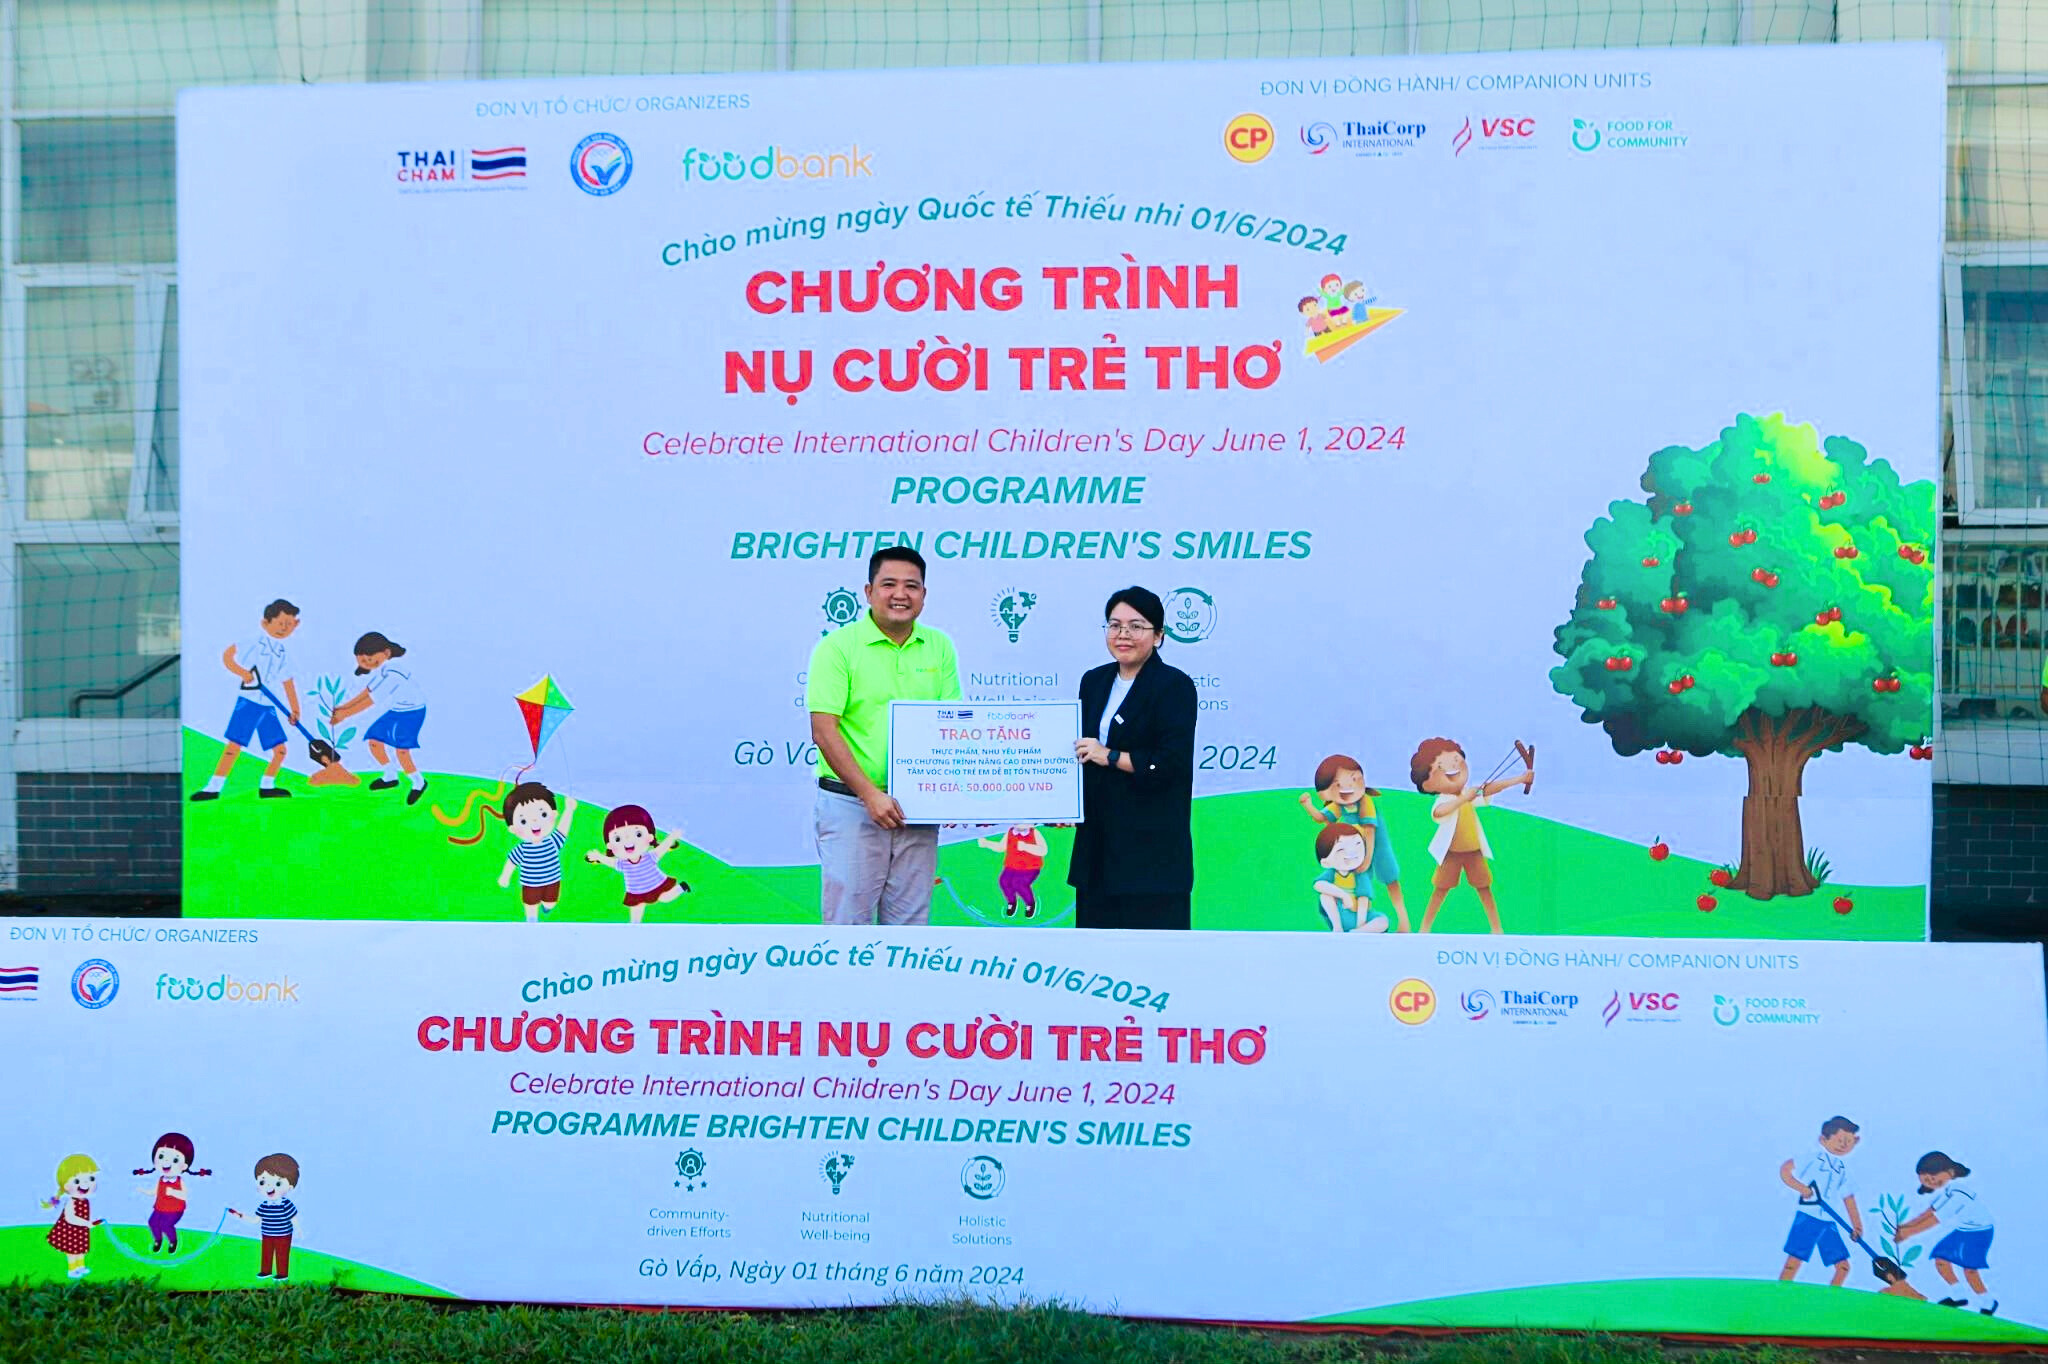 ThaiCham representatives present VND 50 Million to Support Vulnerable Children's Nutrition and Growth.